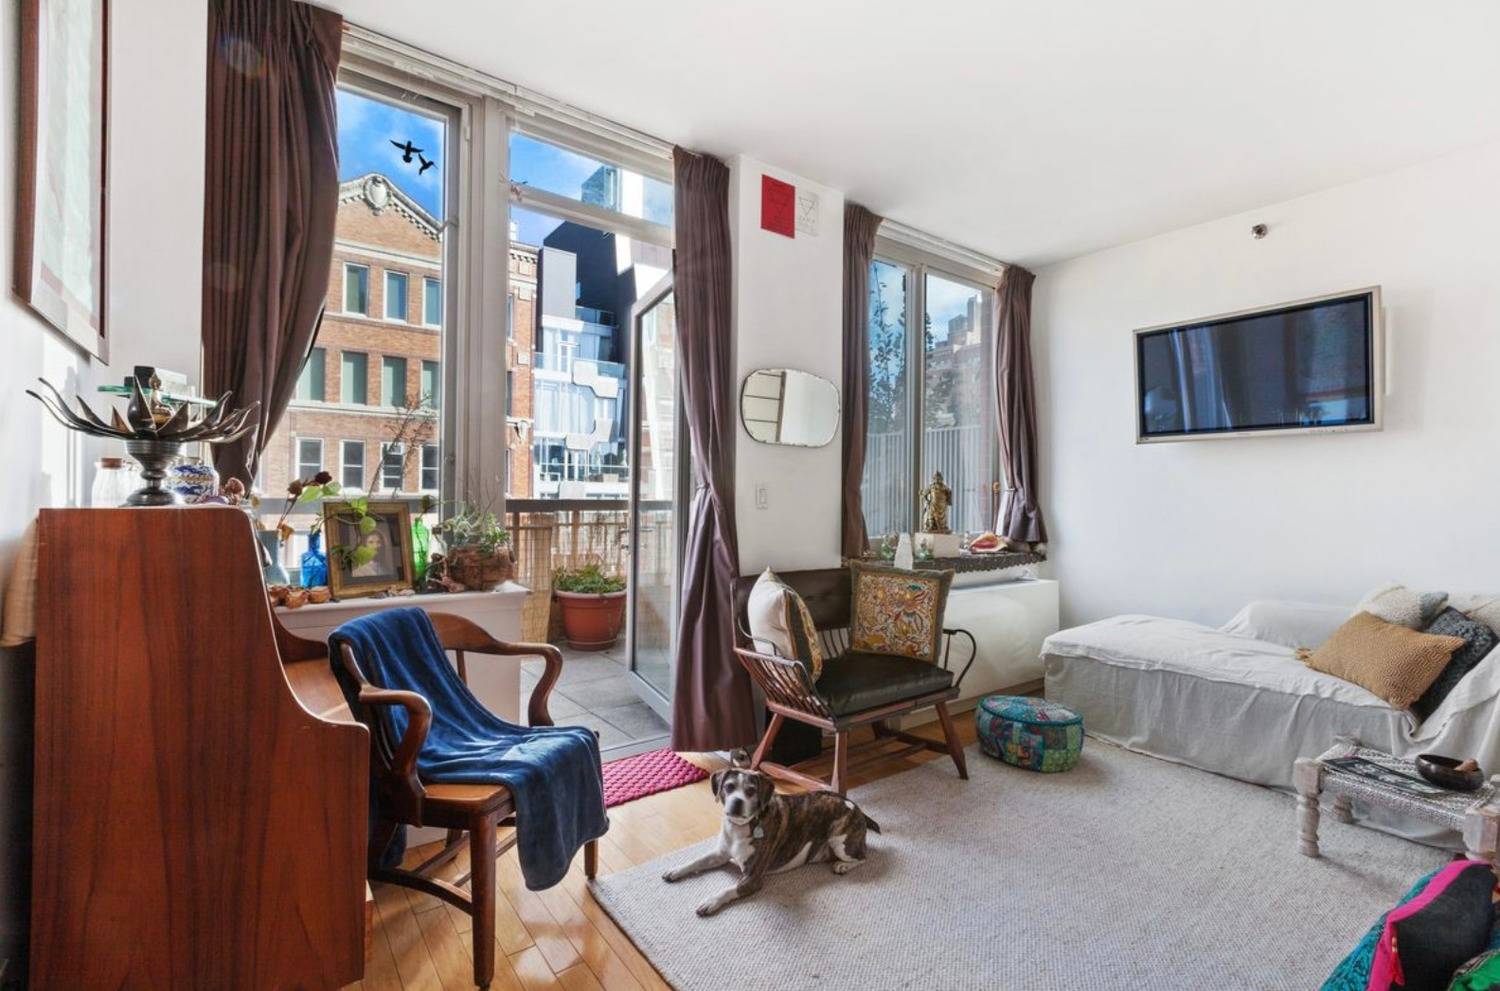 JUNIOR 1 BEDROOM WITH TERRACE is a rare find in Chelsea.